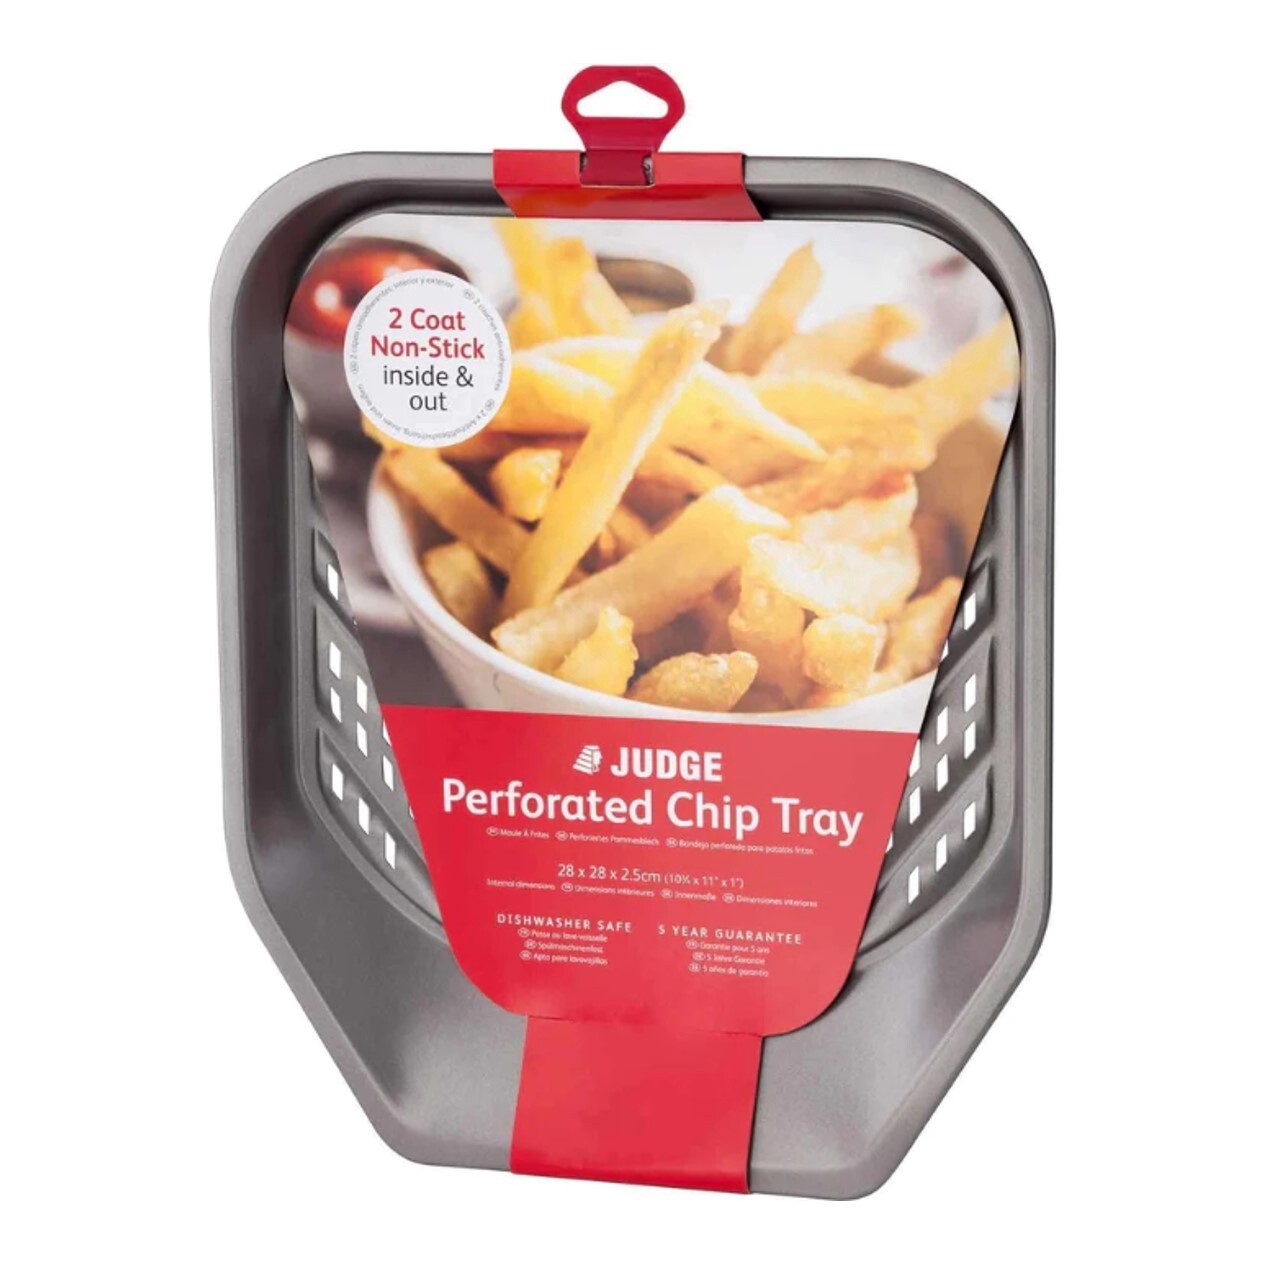 Judge Perforated Chip Tray